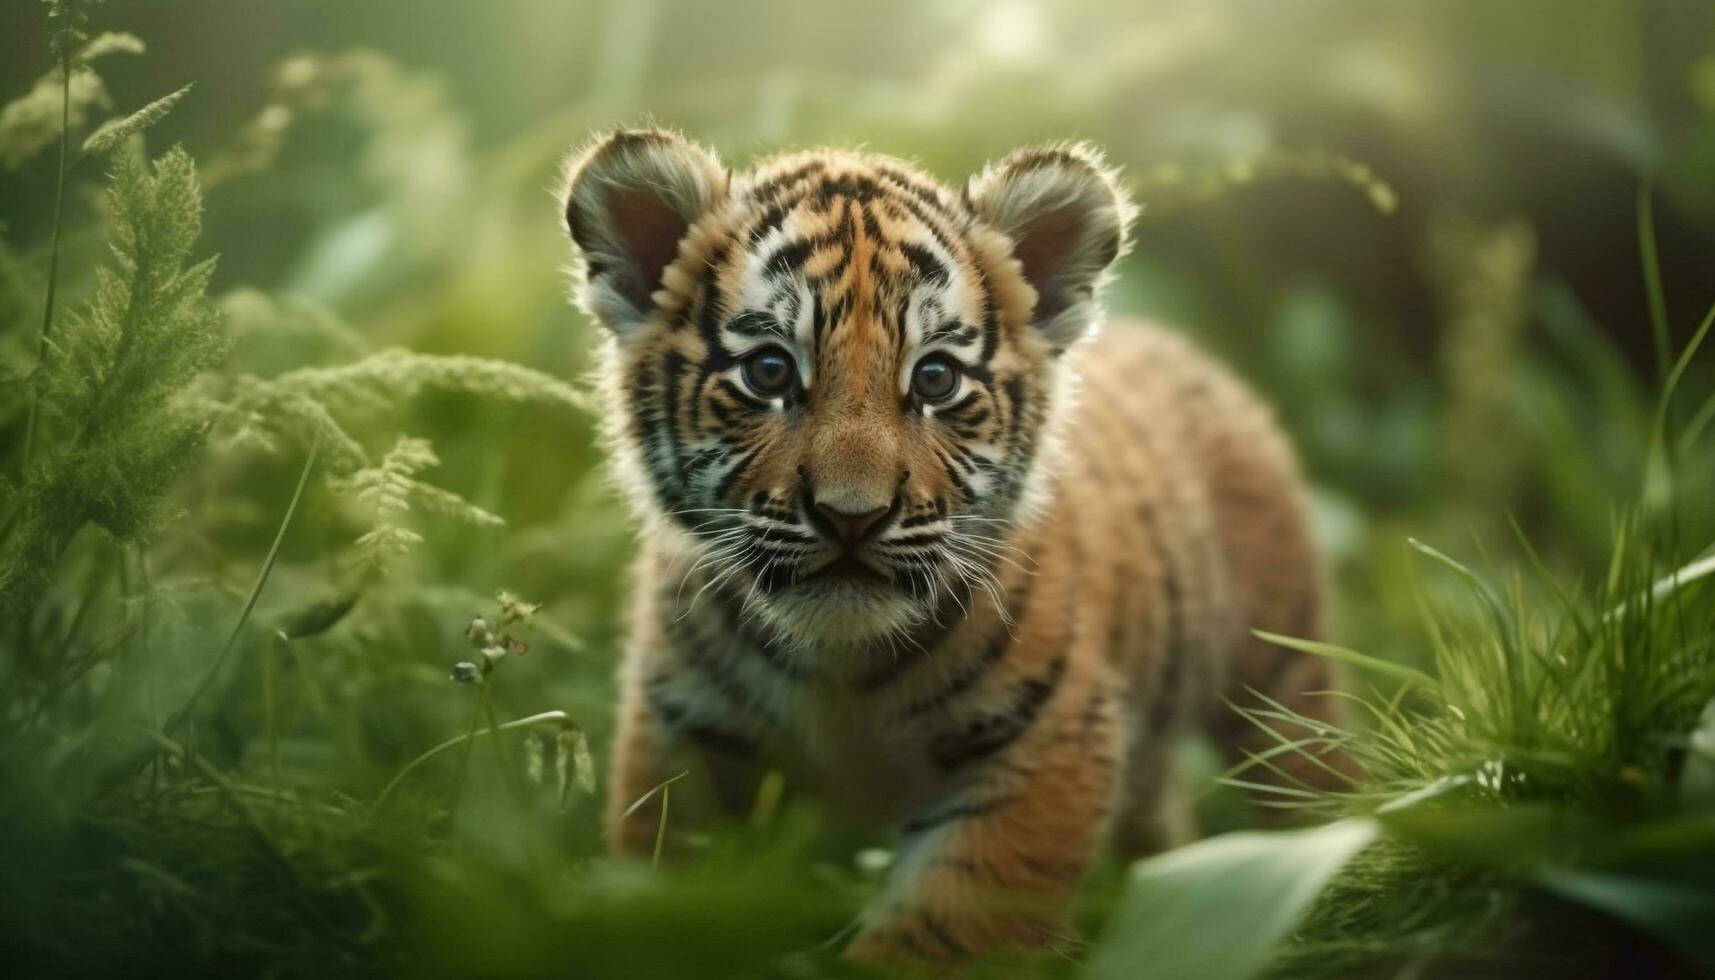 Tiger walking in the forest, staring with tranquil green eyes generated by AI photo